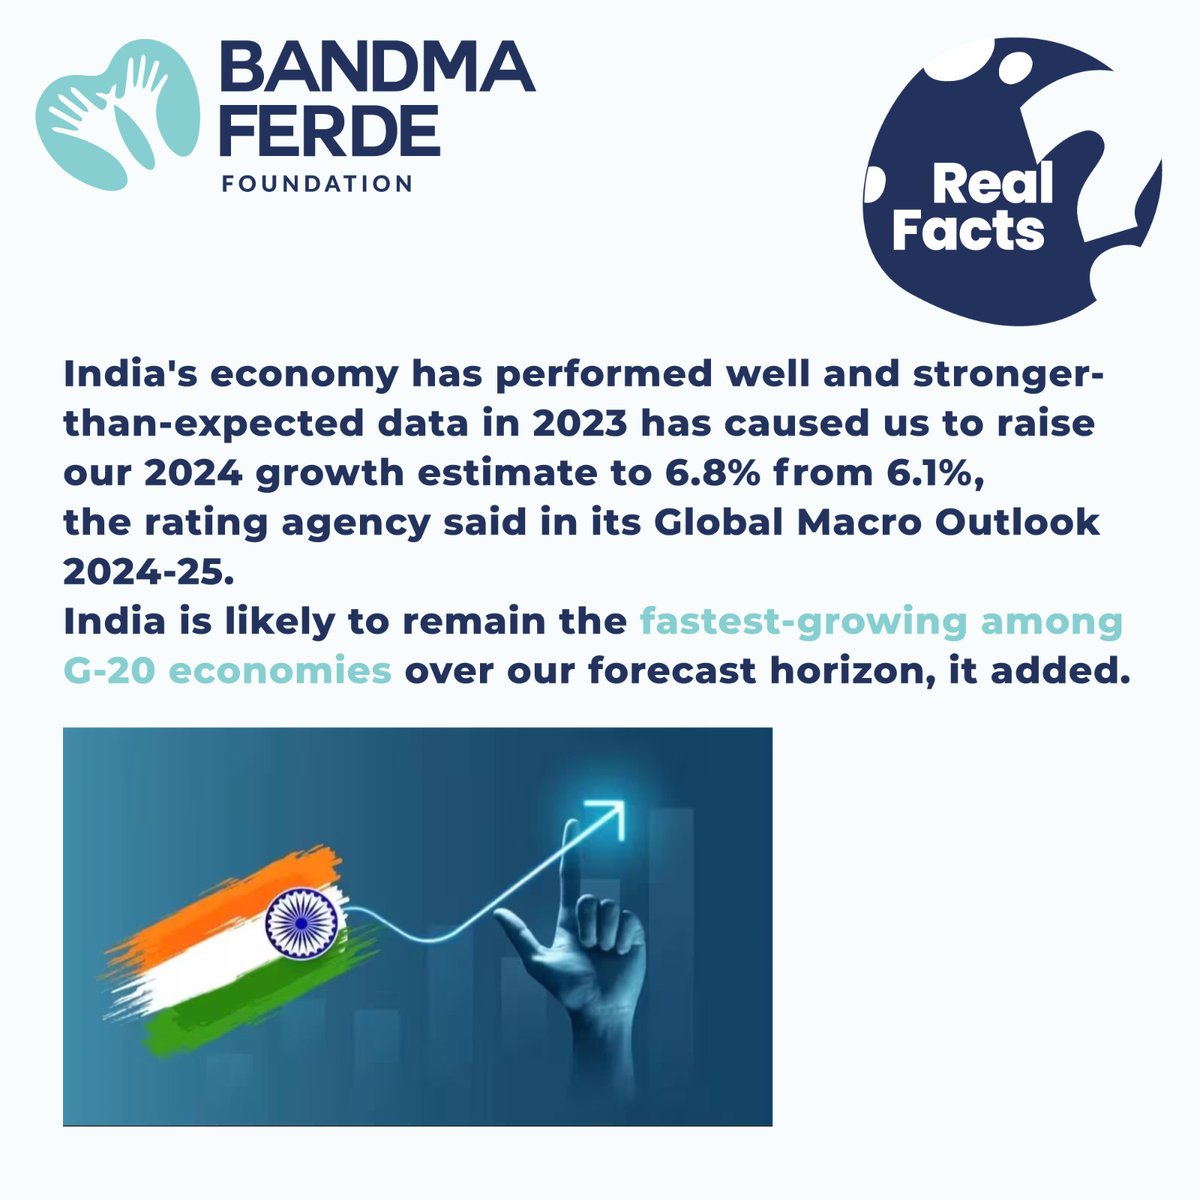 𝐑𝐞𝐚𝐥 𝐅𝐚𝐜𝐭: India's economy is expected to grow at 6.8% in 2024, surpassing earlier estimates, making it the fastest-growing among G-20 nations, as per a rating agency's Global Macro Outlook 2024-25. #Bandmaferdefoundation #Bandmaferde #realfacts #India #factsmatter